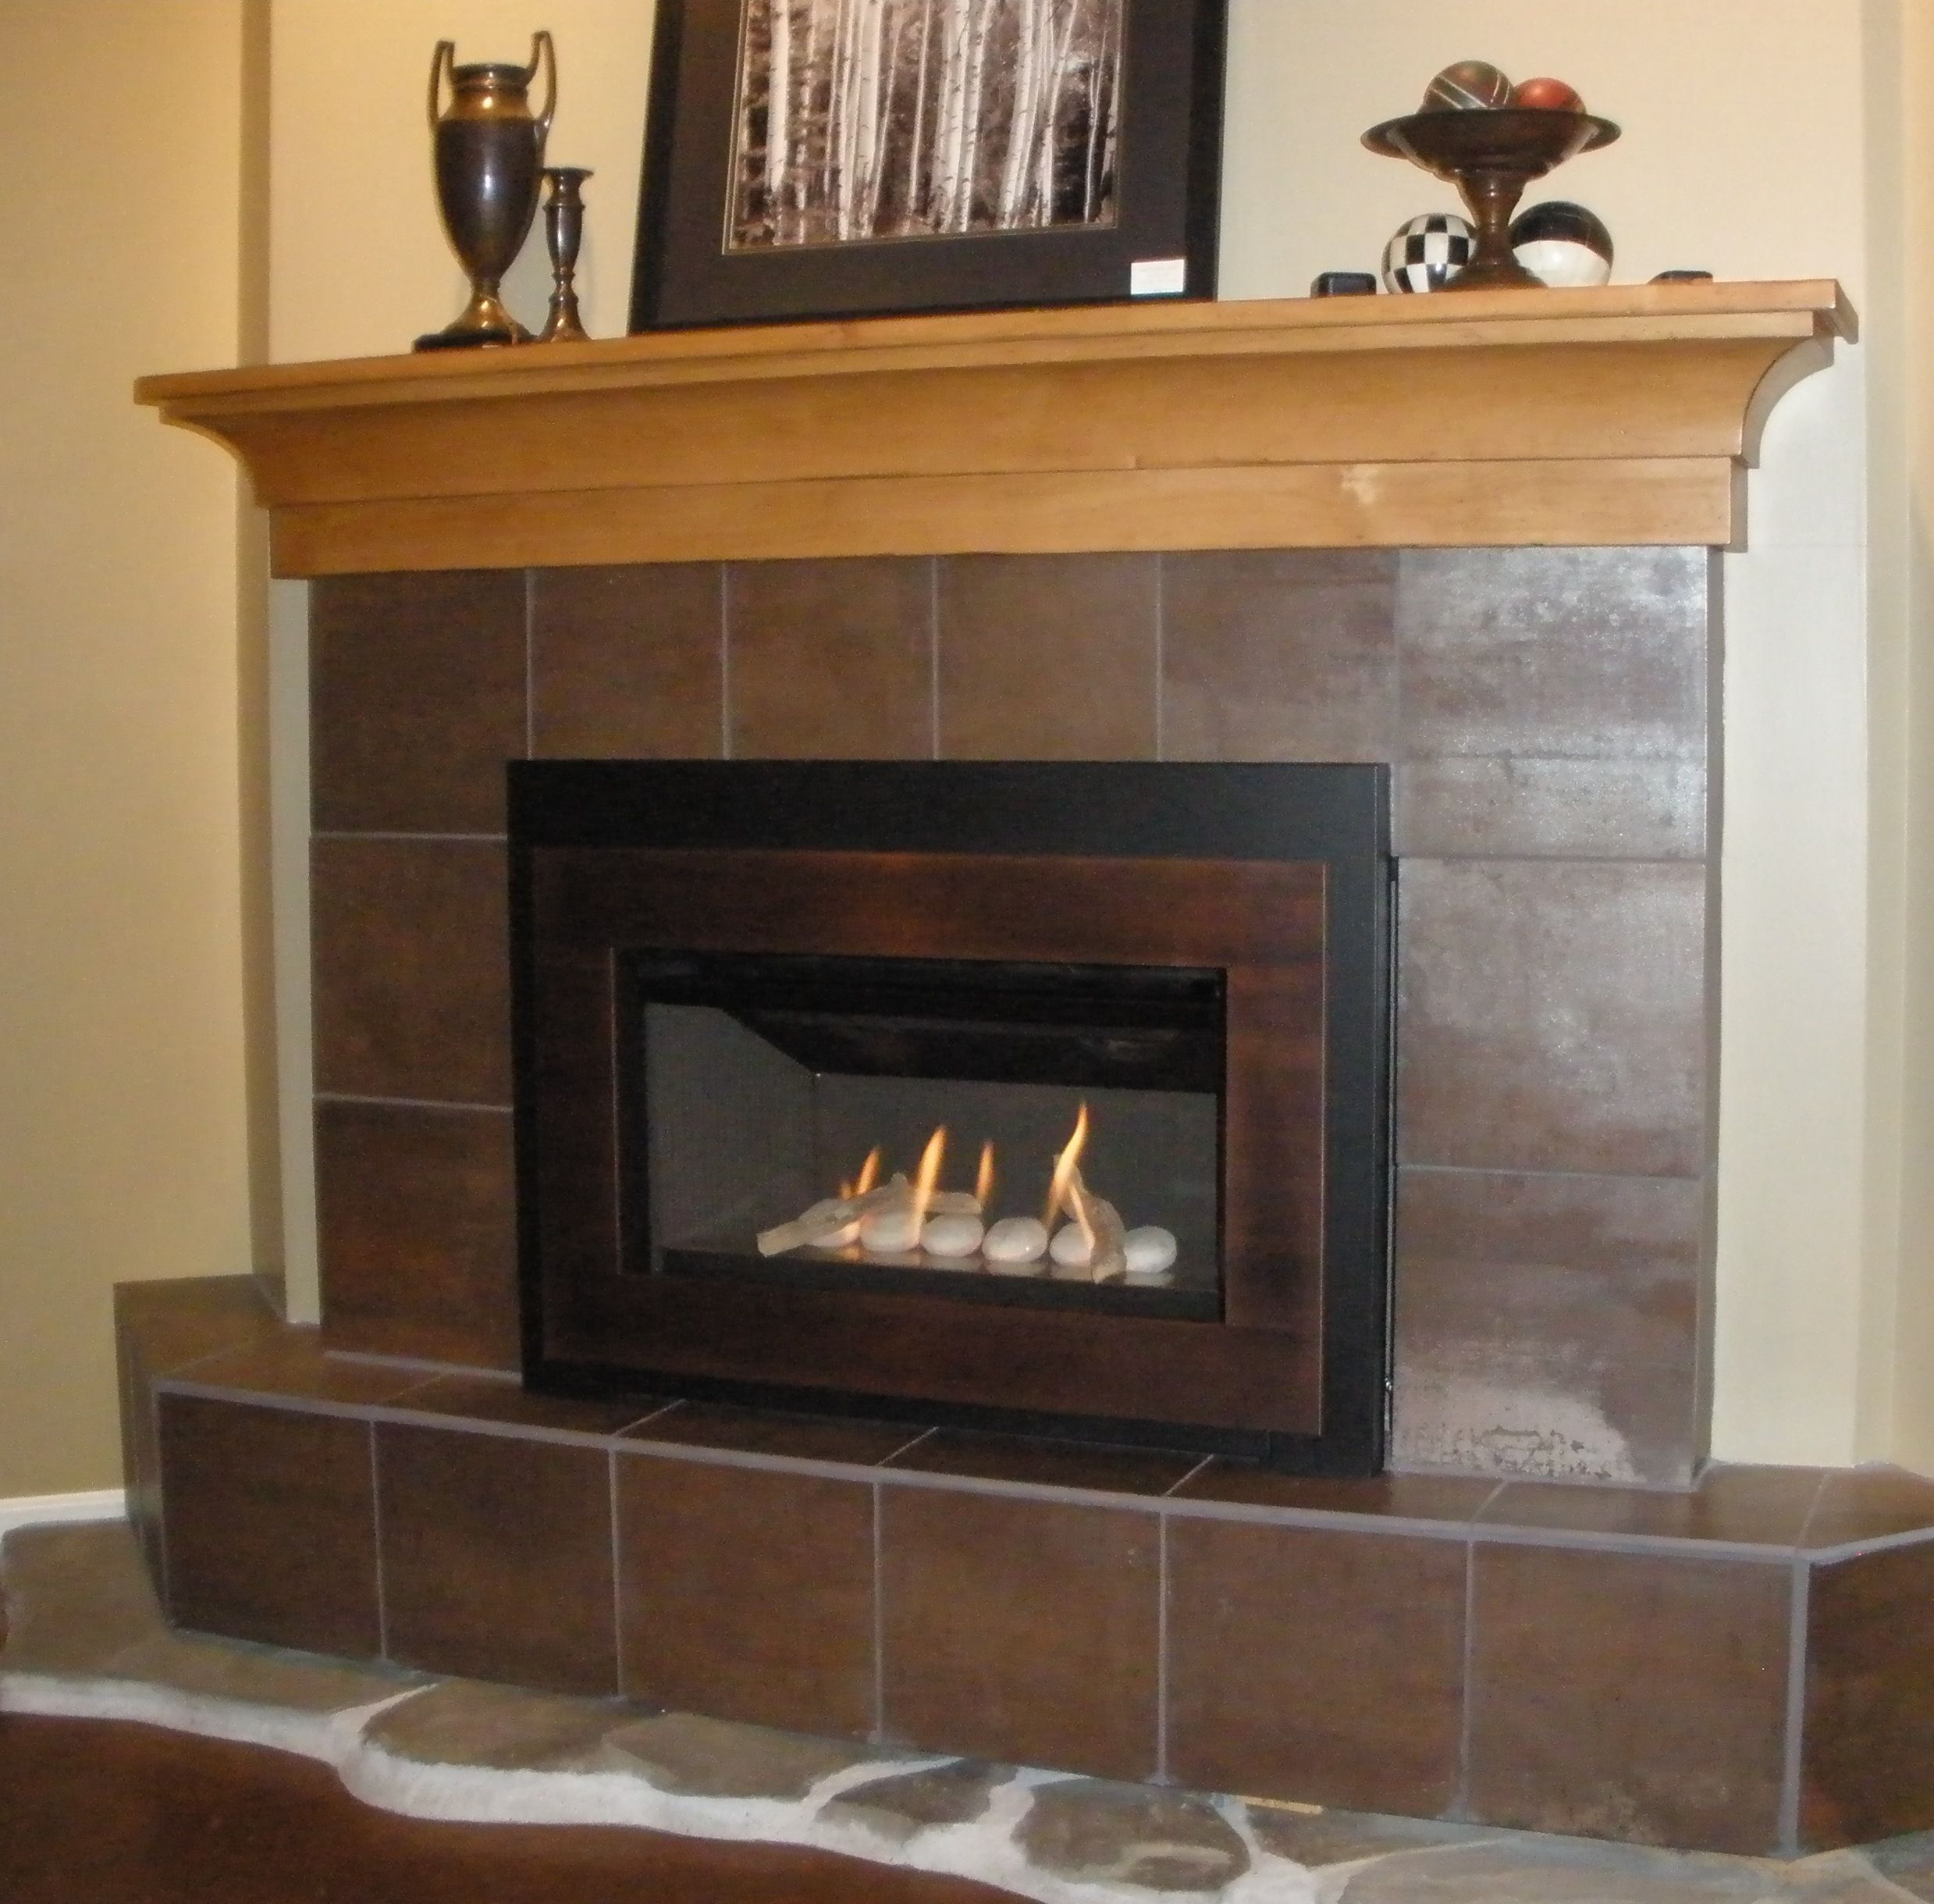 Fireplace Blocker Fresh Pin On Valor Radiant Gas Fireplaces Midwest Dealer